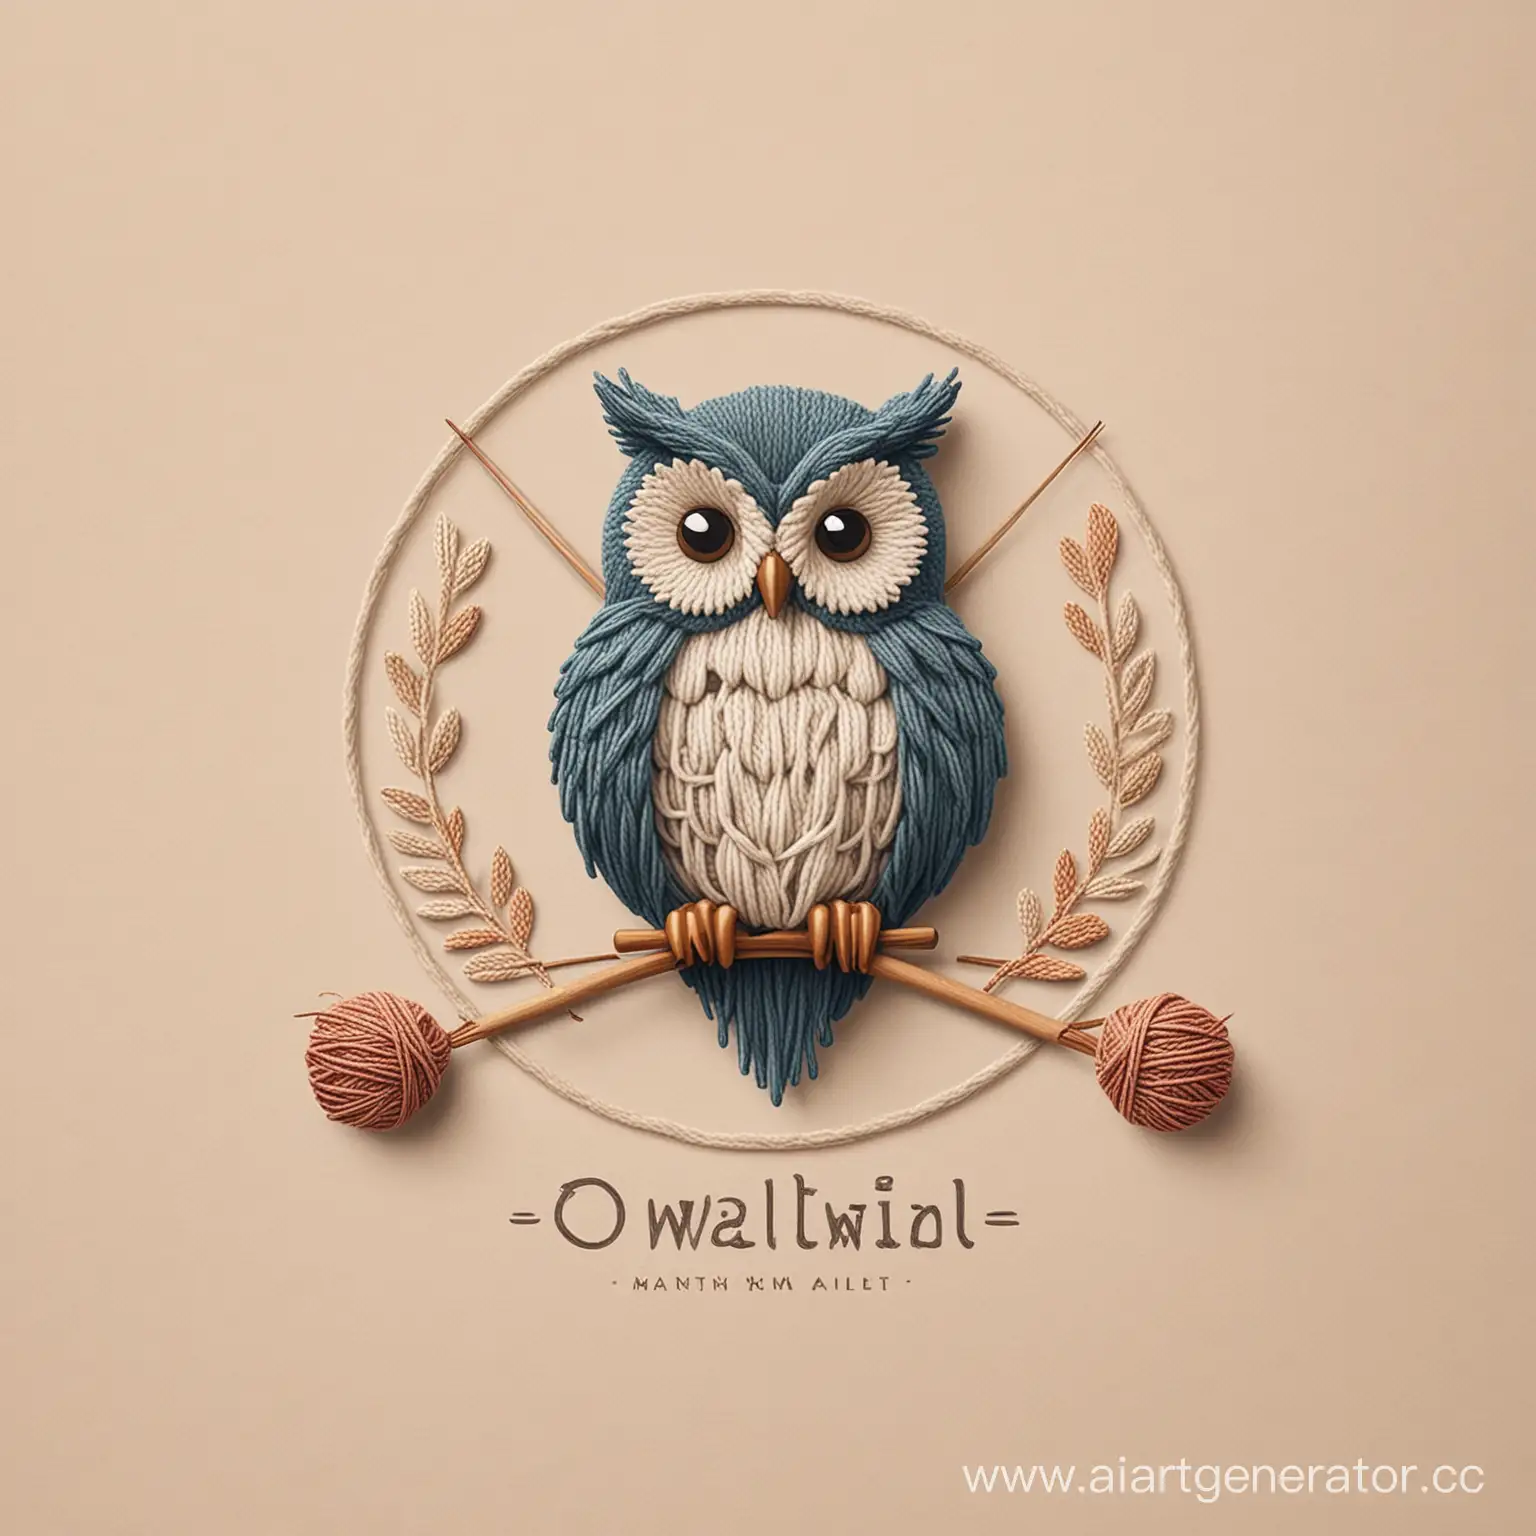 Minimalistic-Logo-Design-with-Owl-Threads-and-Knitting-Needles